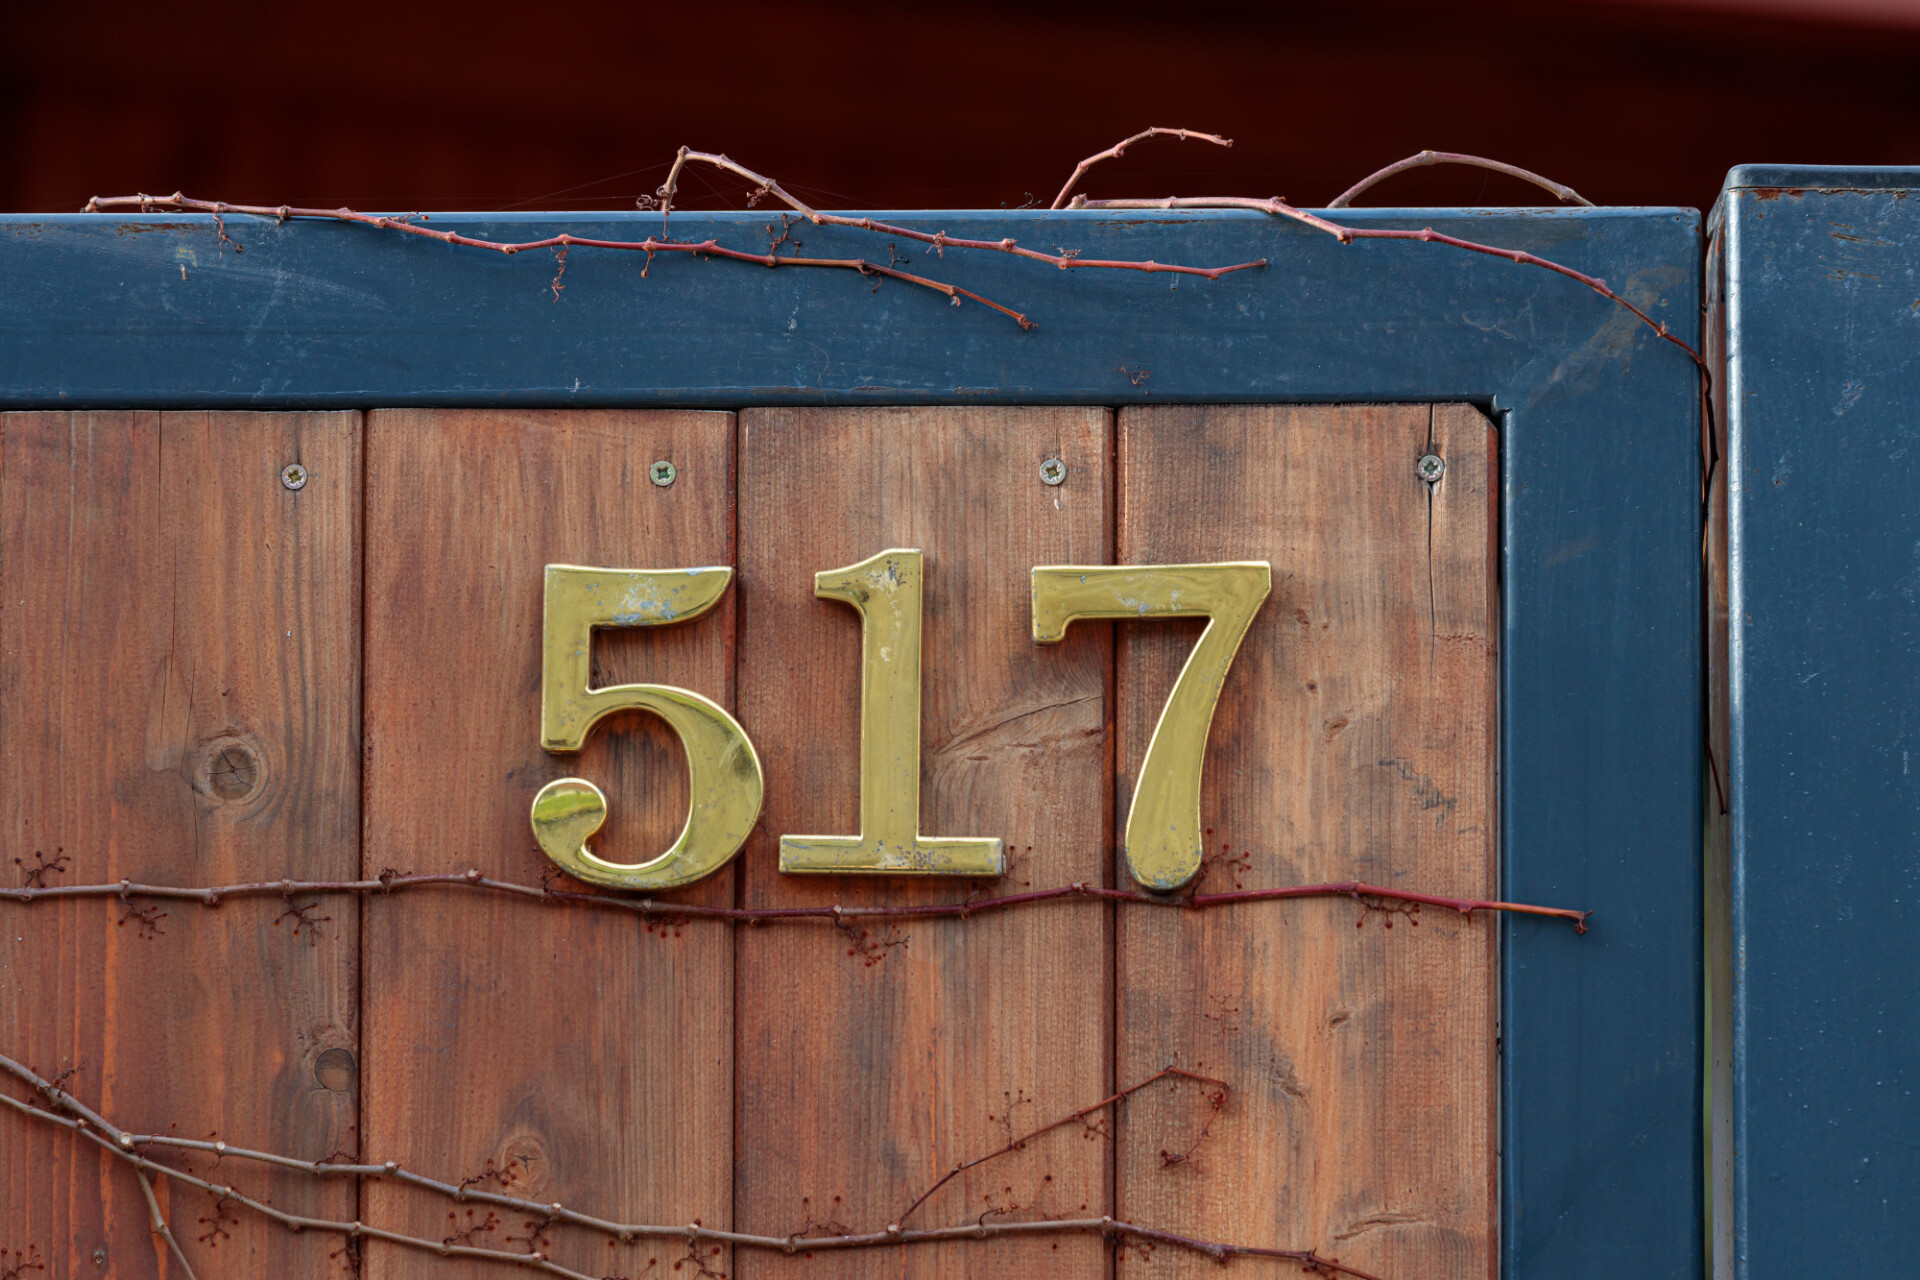 House number 517